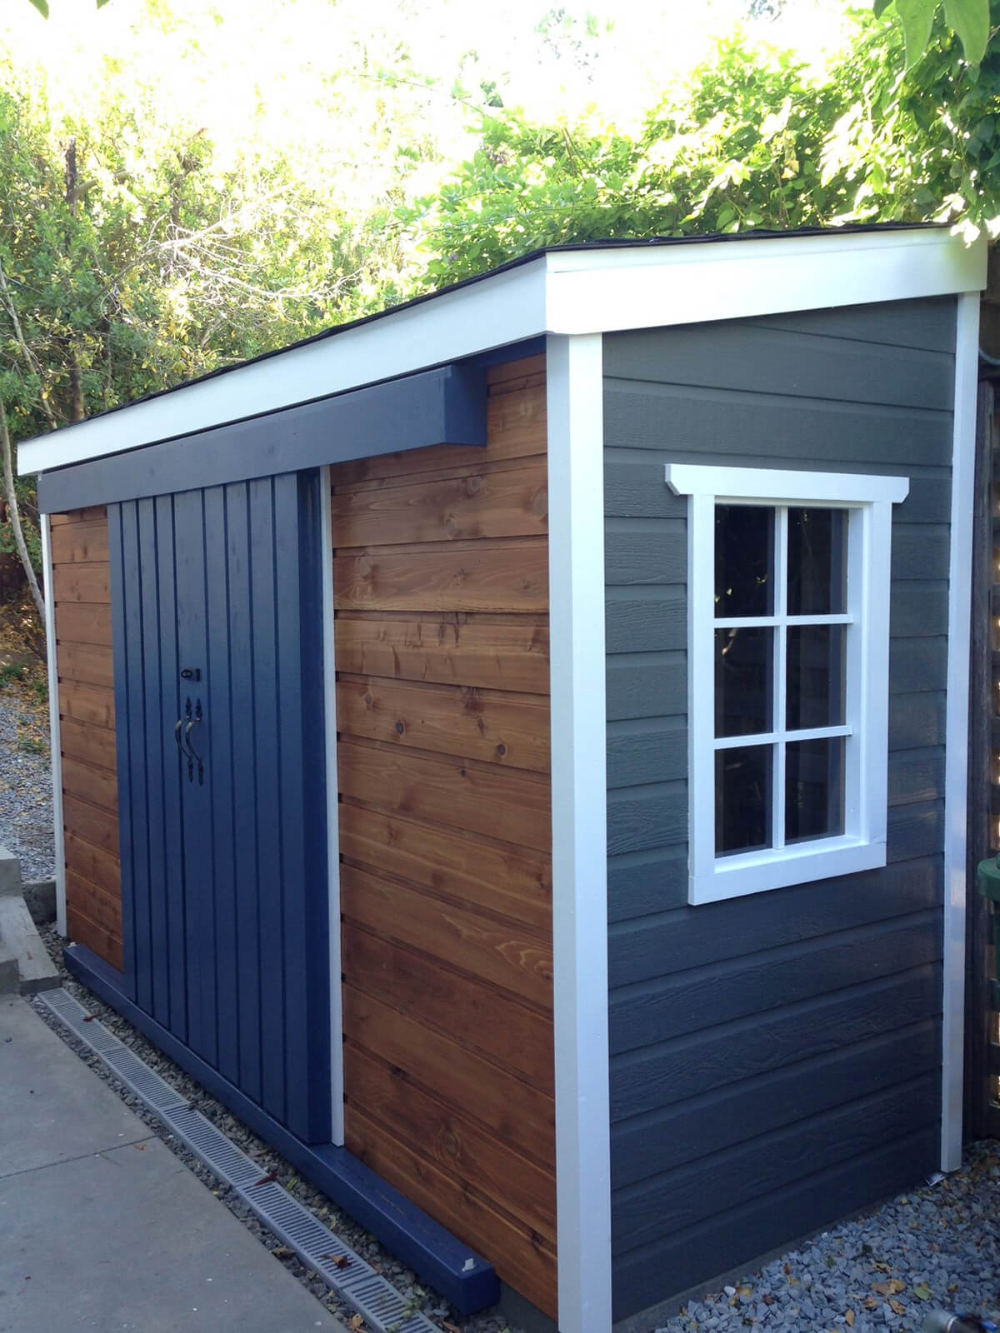 The Beauty of Compact Storage Sheds